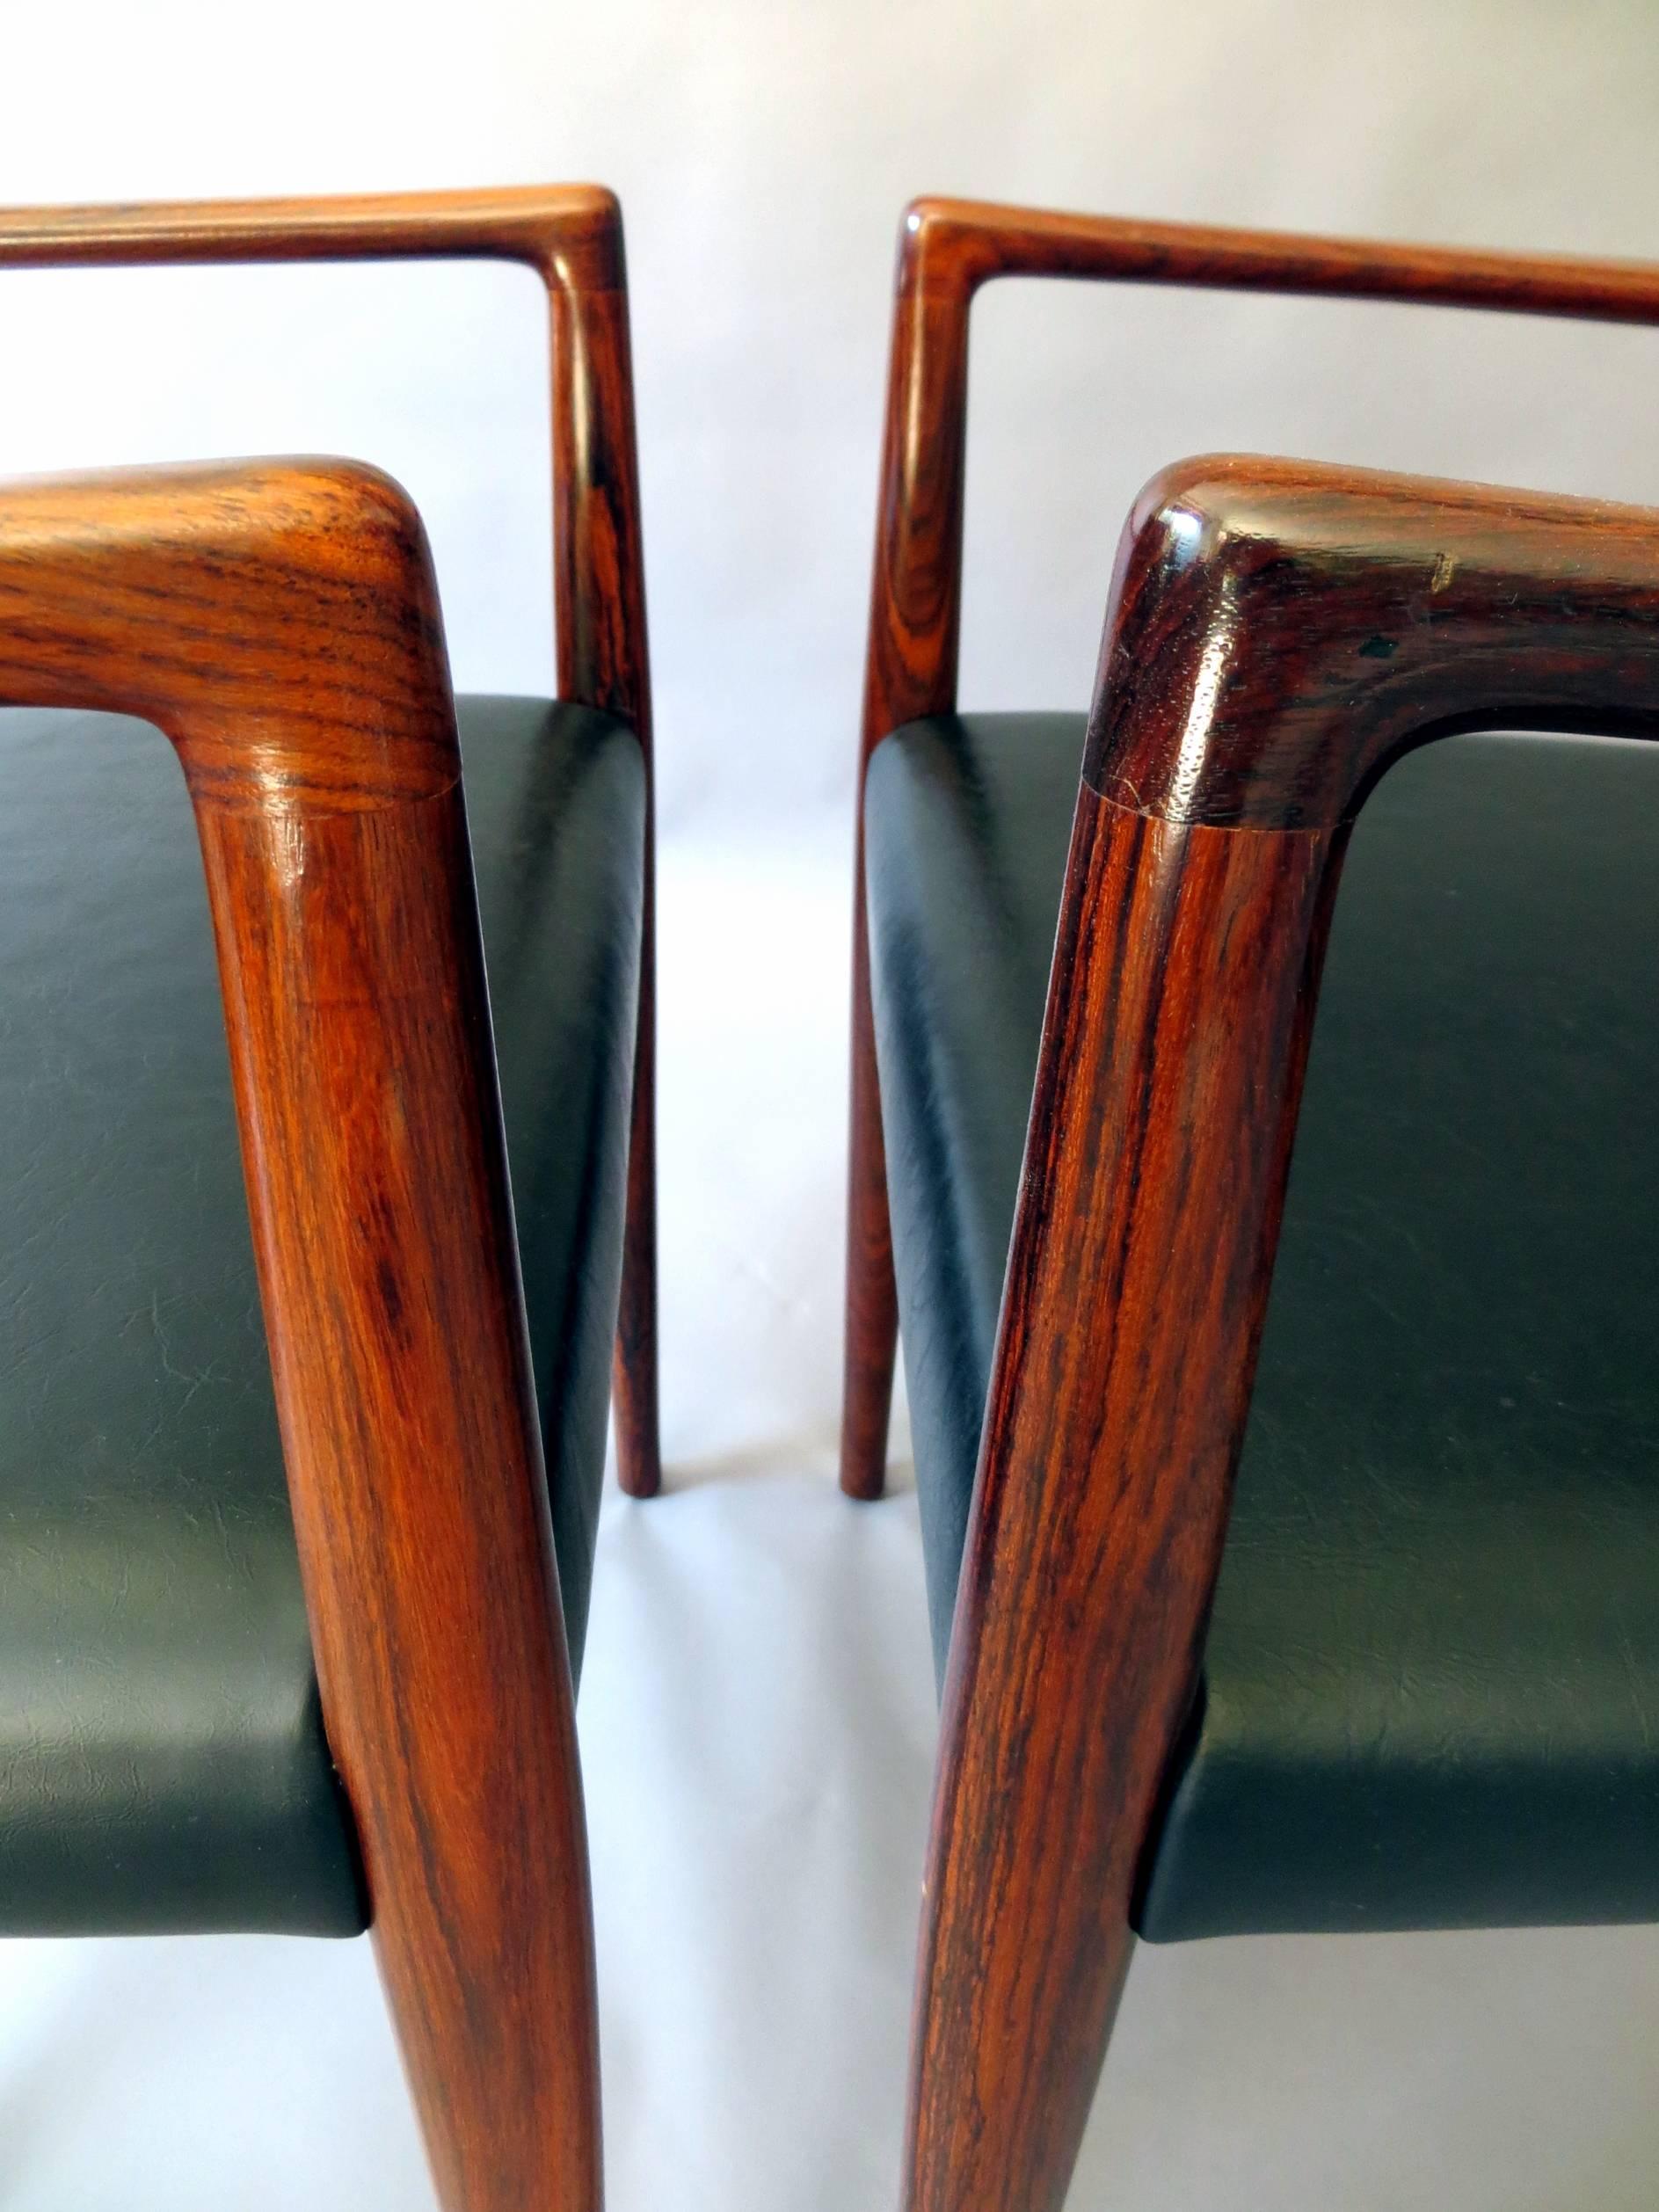 Danish Mid-Century Modern Rosewood and Leather Dining Chairs, Set of Two, 1960s For Sale 11